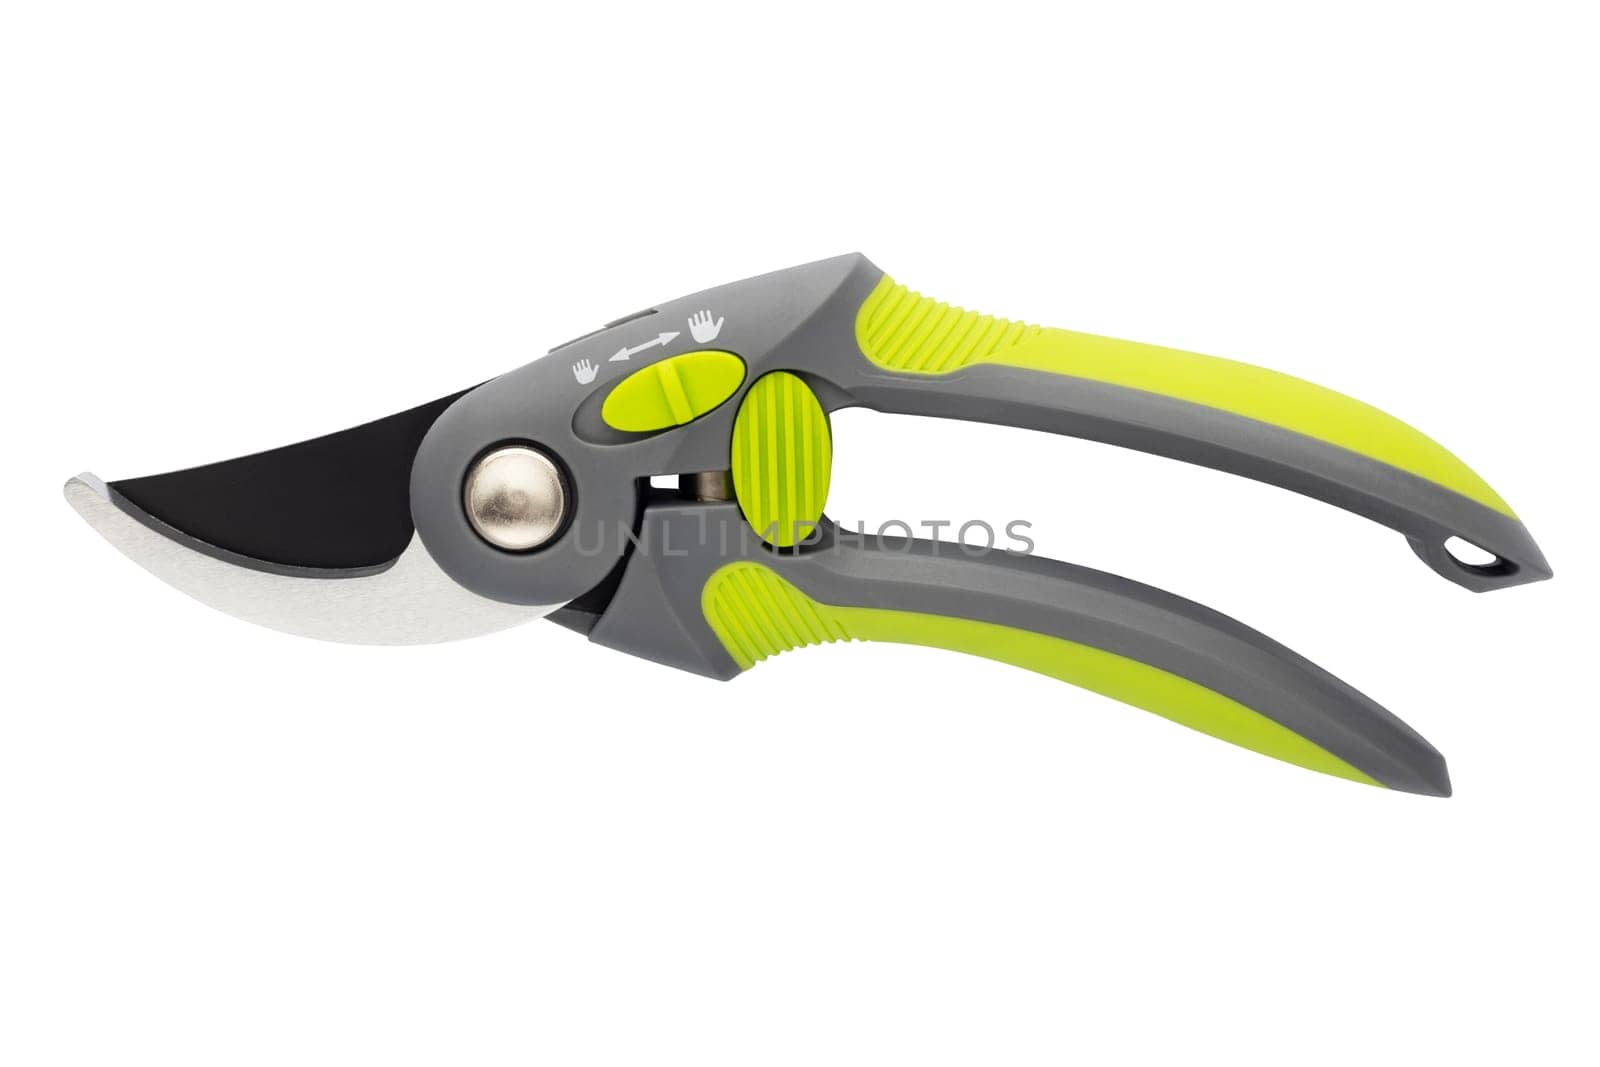 Garden pruning shears with ergonomic design isolated on white background. Tool for design and print.